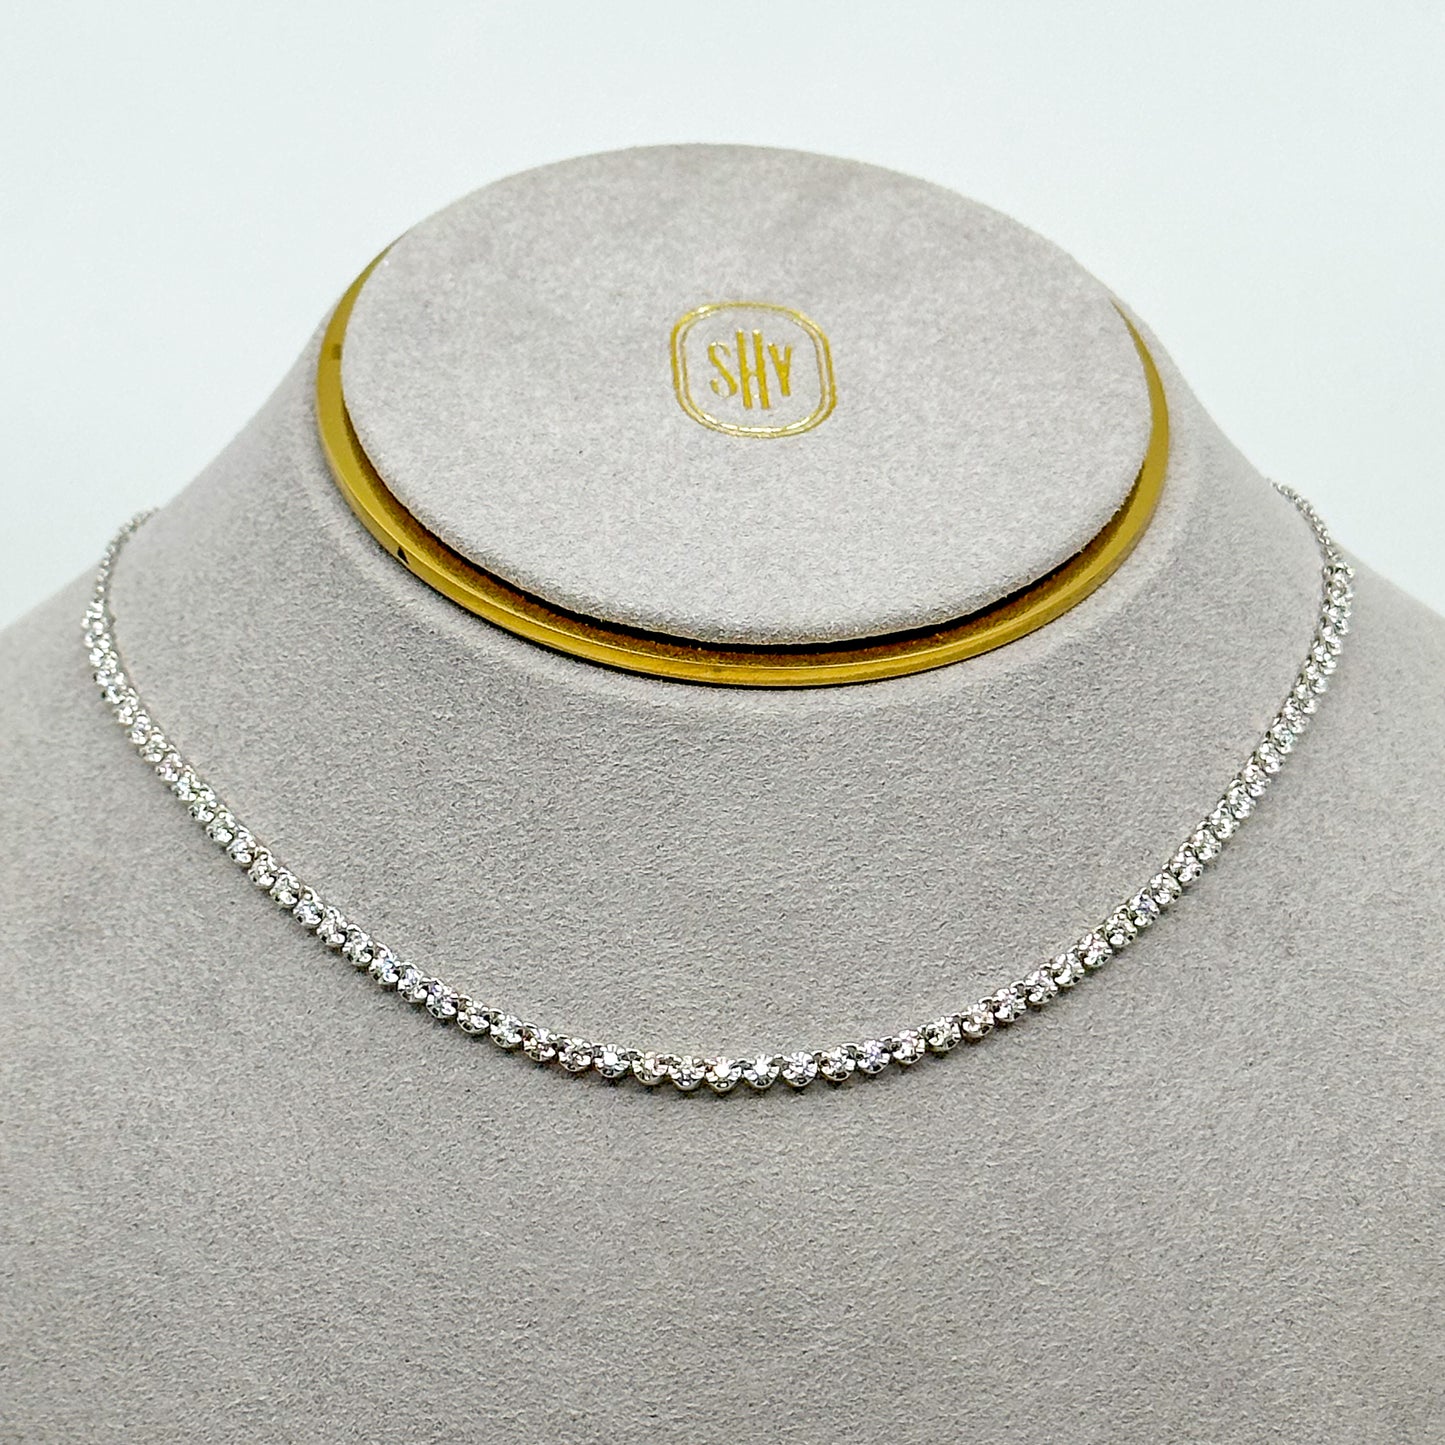 Diamond Line Necklace 1.07cttw in 14K Yellow Gold